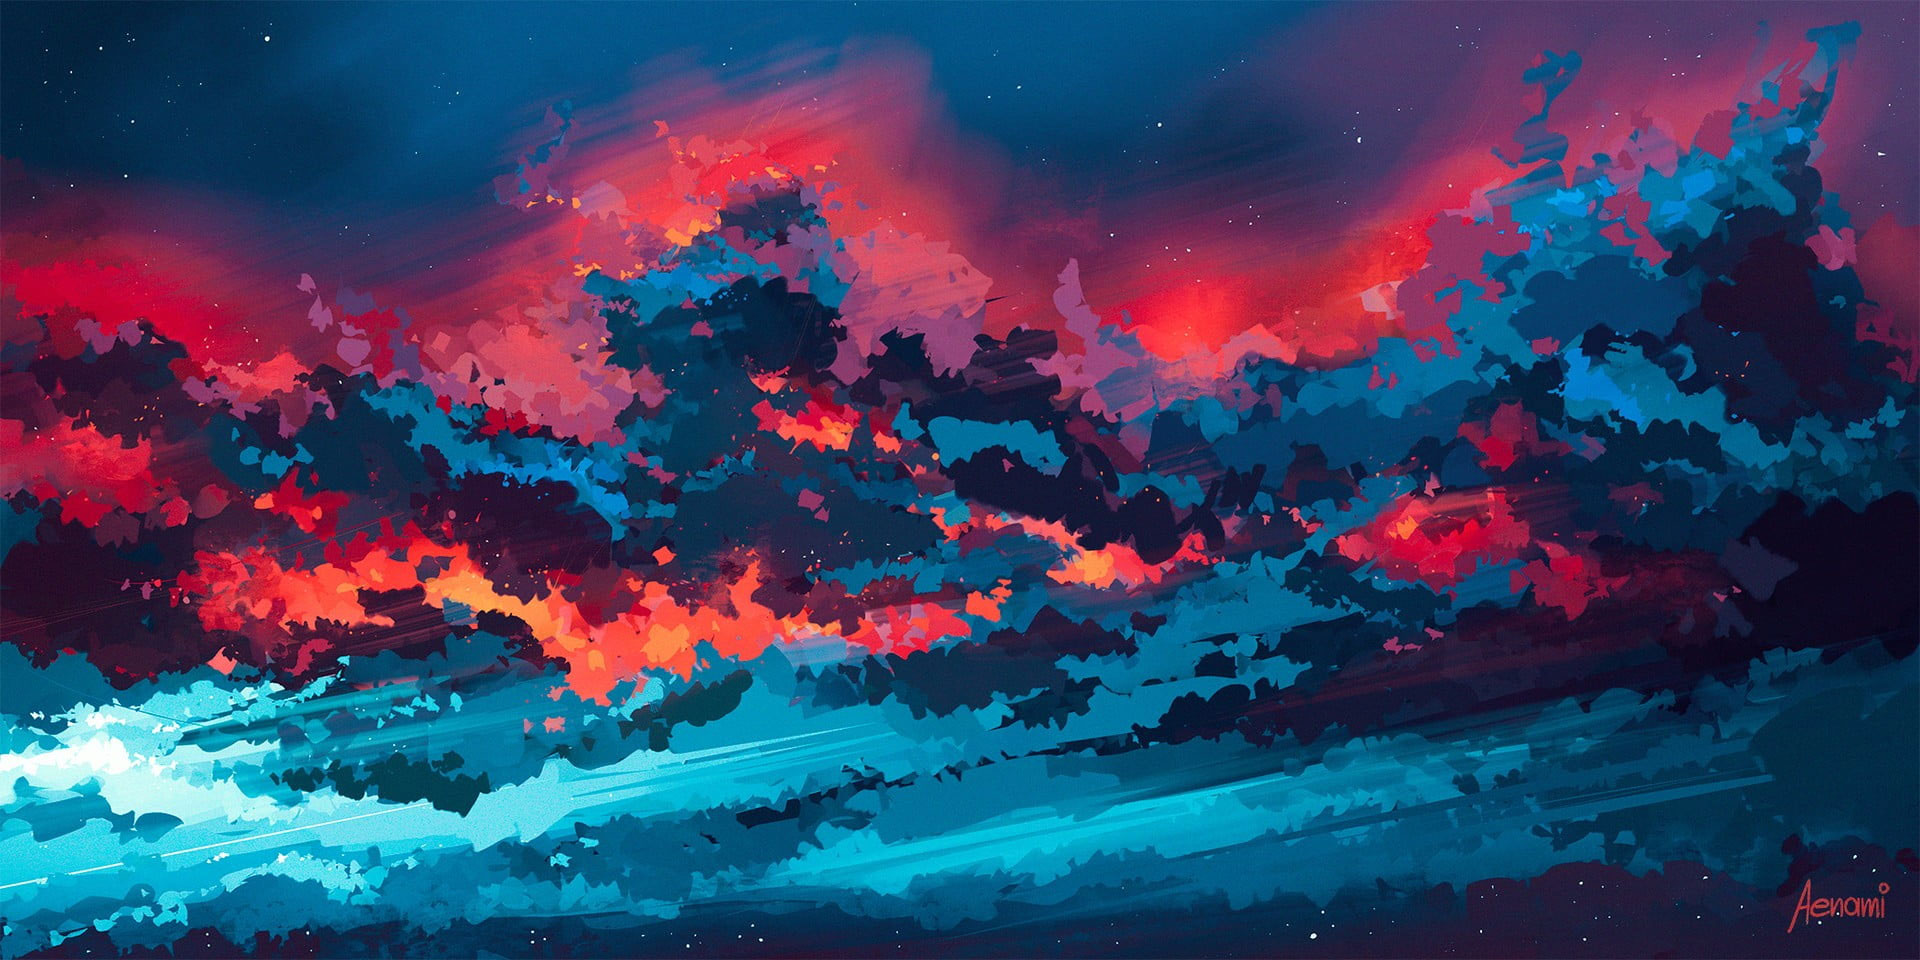 Abstract painting wallpaper, artwork, Aenami, no people, night, sky, nature